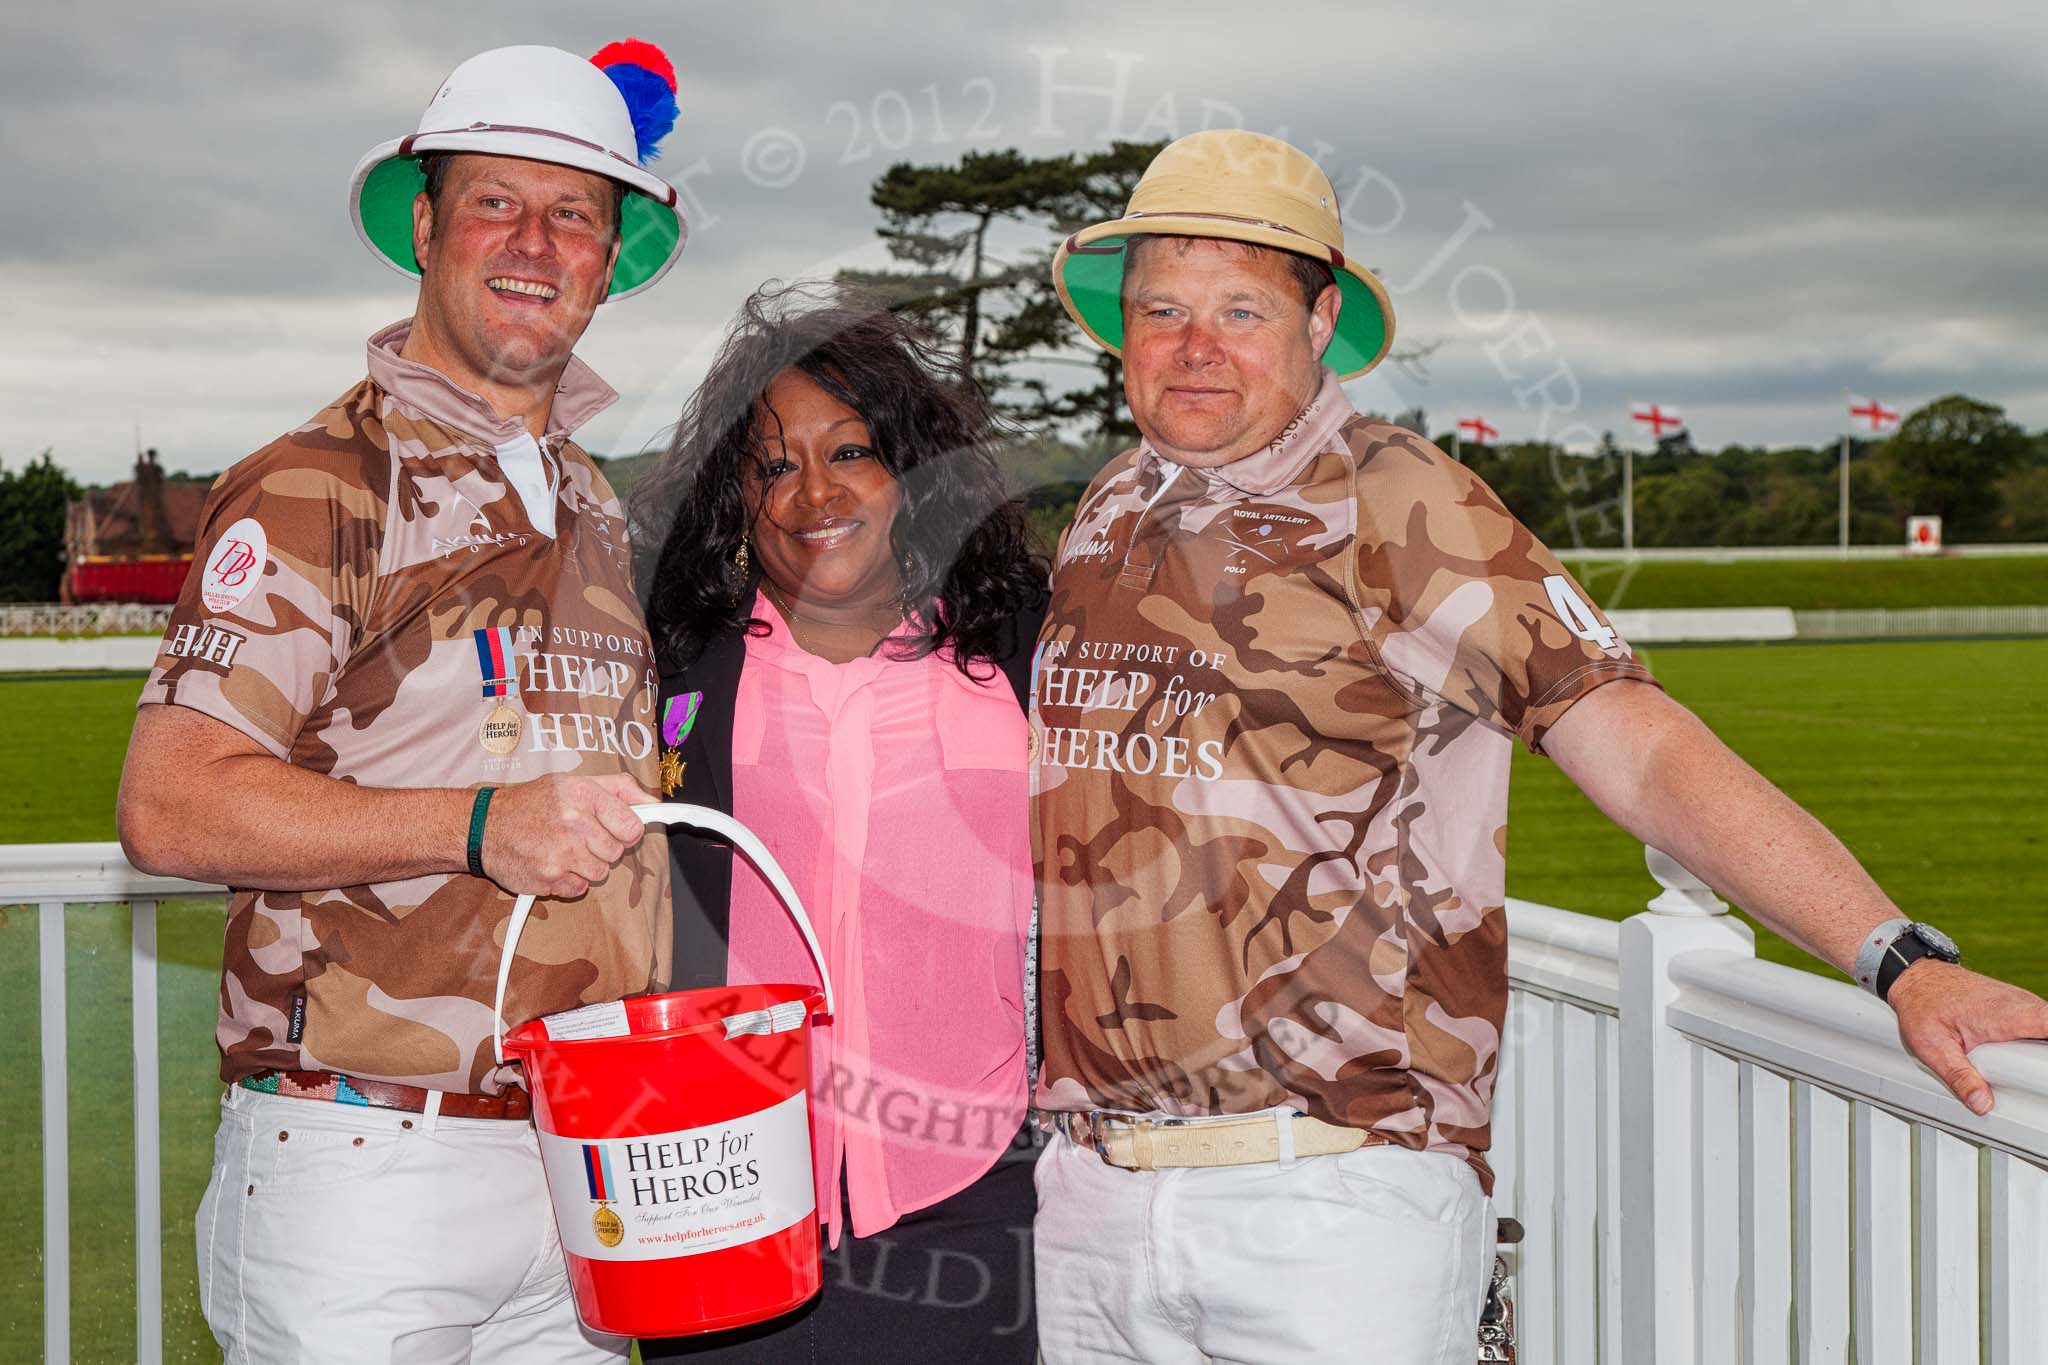 DBPC Polo in the Park 2012: The Royal Artillery Exhibition Game in support of "Help for Heroes" - Major Andy Wood and Bombardier Richard Morris with soul diva Kym Mazelle..
Dallas Burston Polo Club,
Stoneythorpe Estate,
Southam,
Warwickshire,
United Kingdom,
on 16 September 2012 at 15:39, image #238